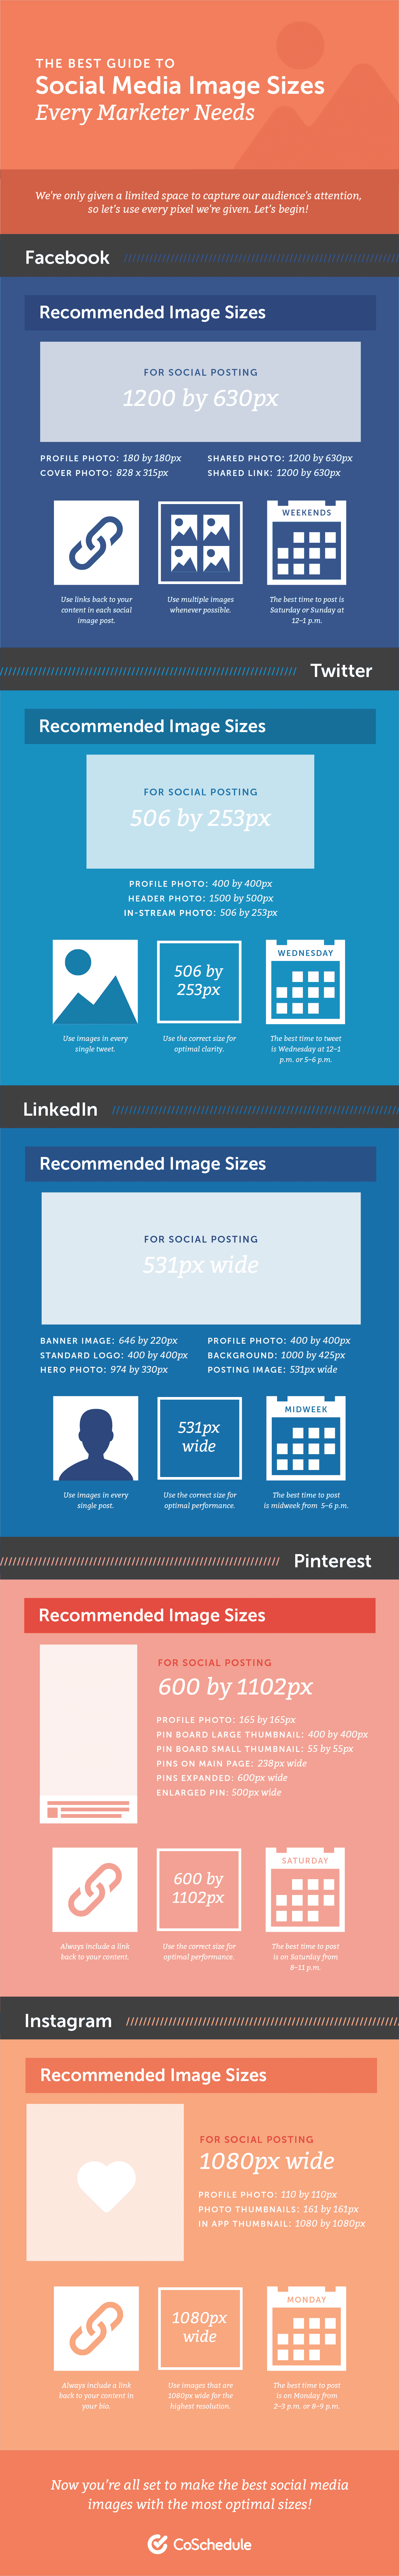 Infographic guide to image sizing for Facebook, Twitter, LinkedIn, Pinterest and Instagram.